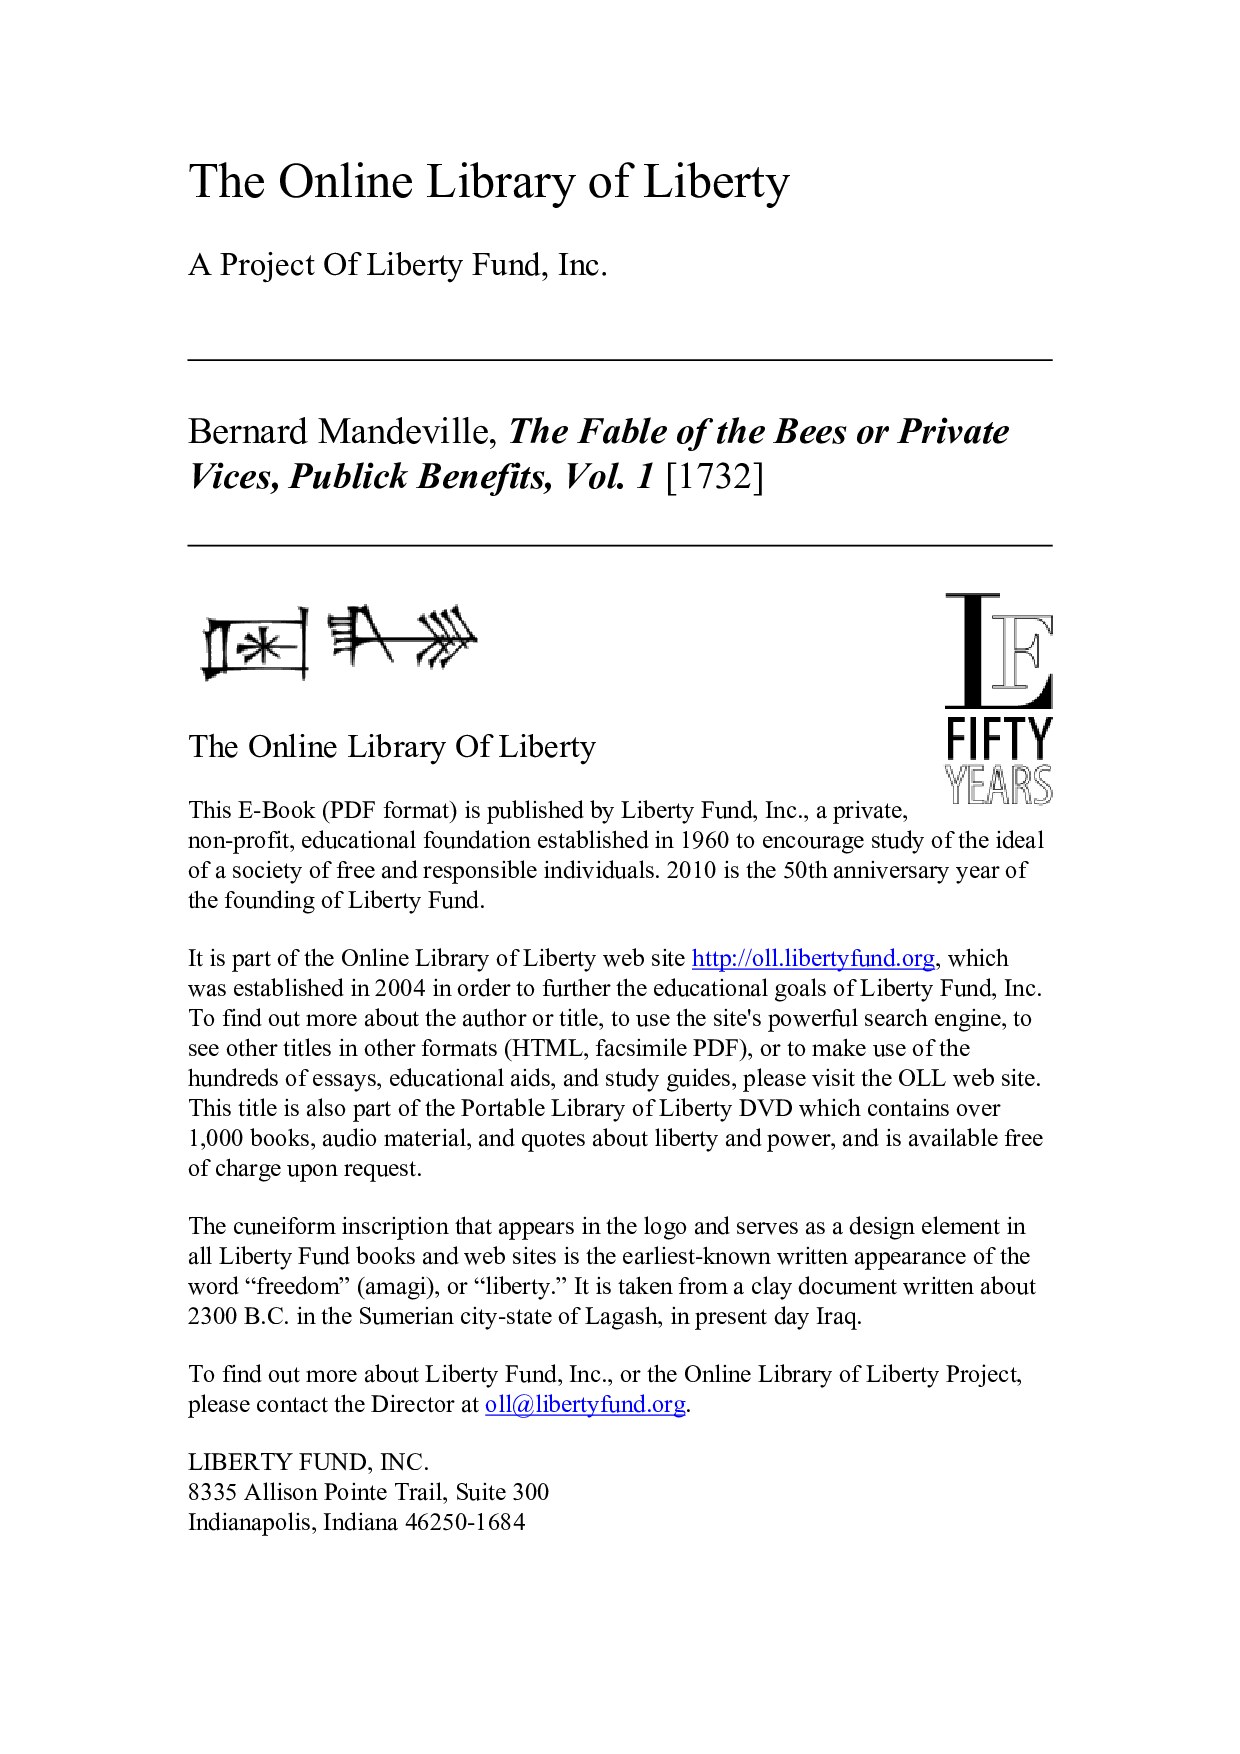 Online Library of Liberty: The Fable of the Bees or Private Vices, Publick Benefits, Vol. 1 - Portable Library of Liberty